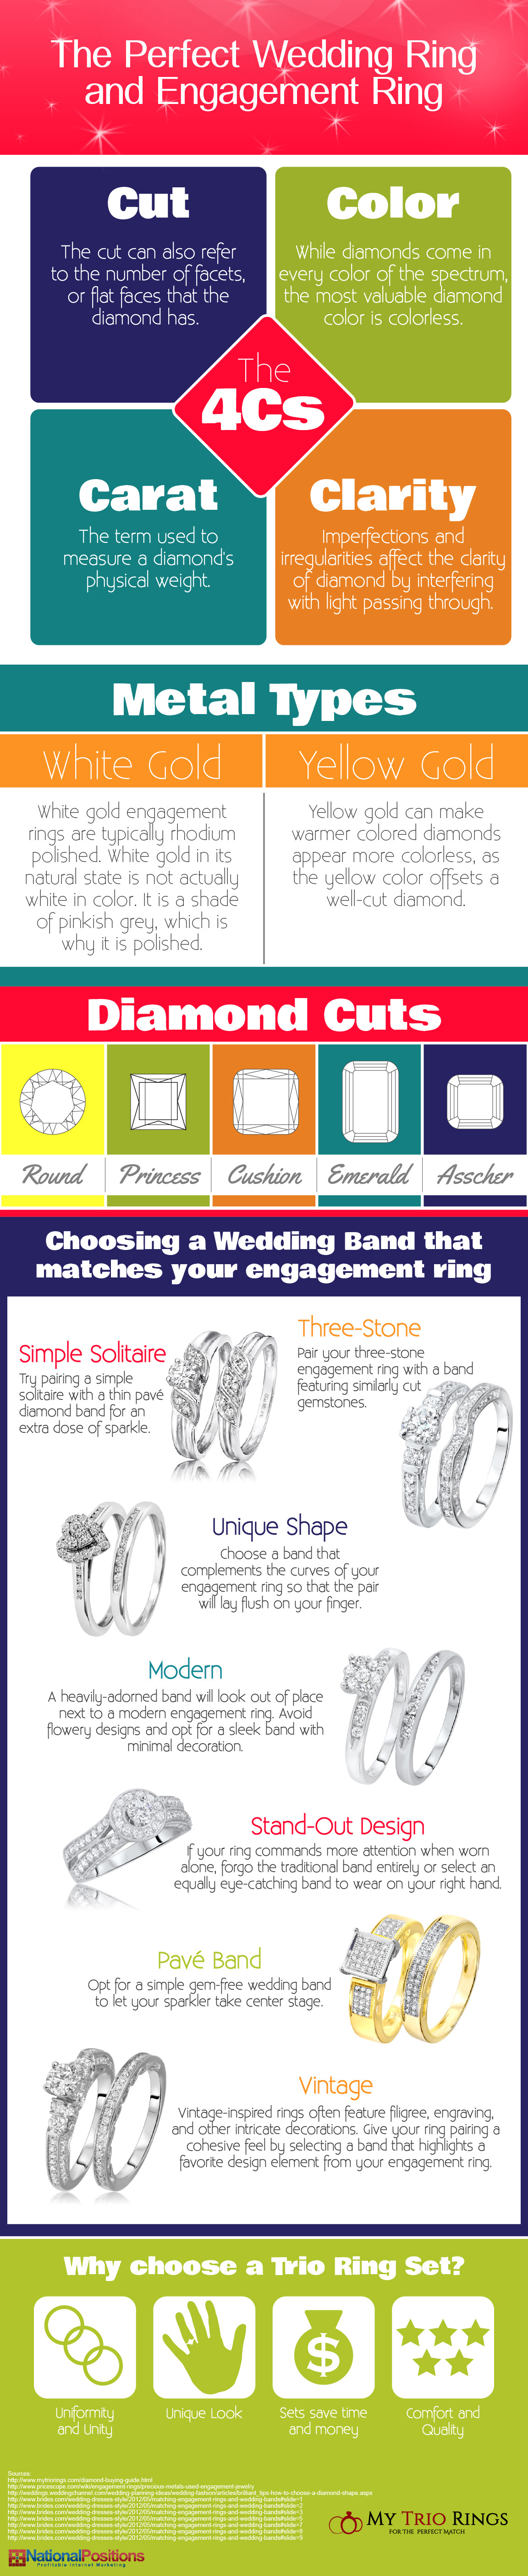 Tips for Choosing the Perfect Engagement Ring